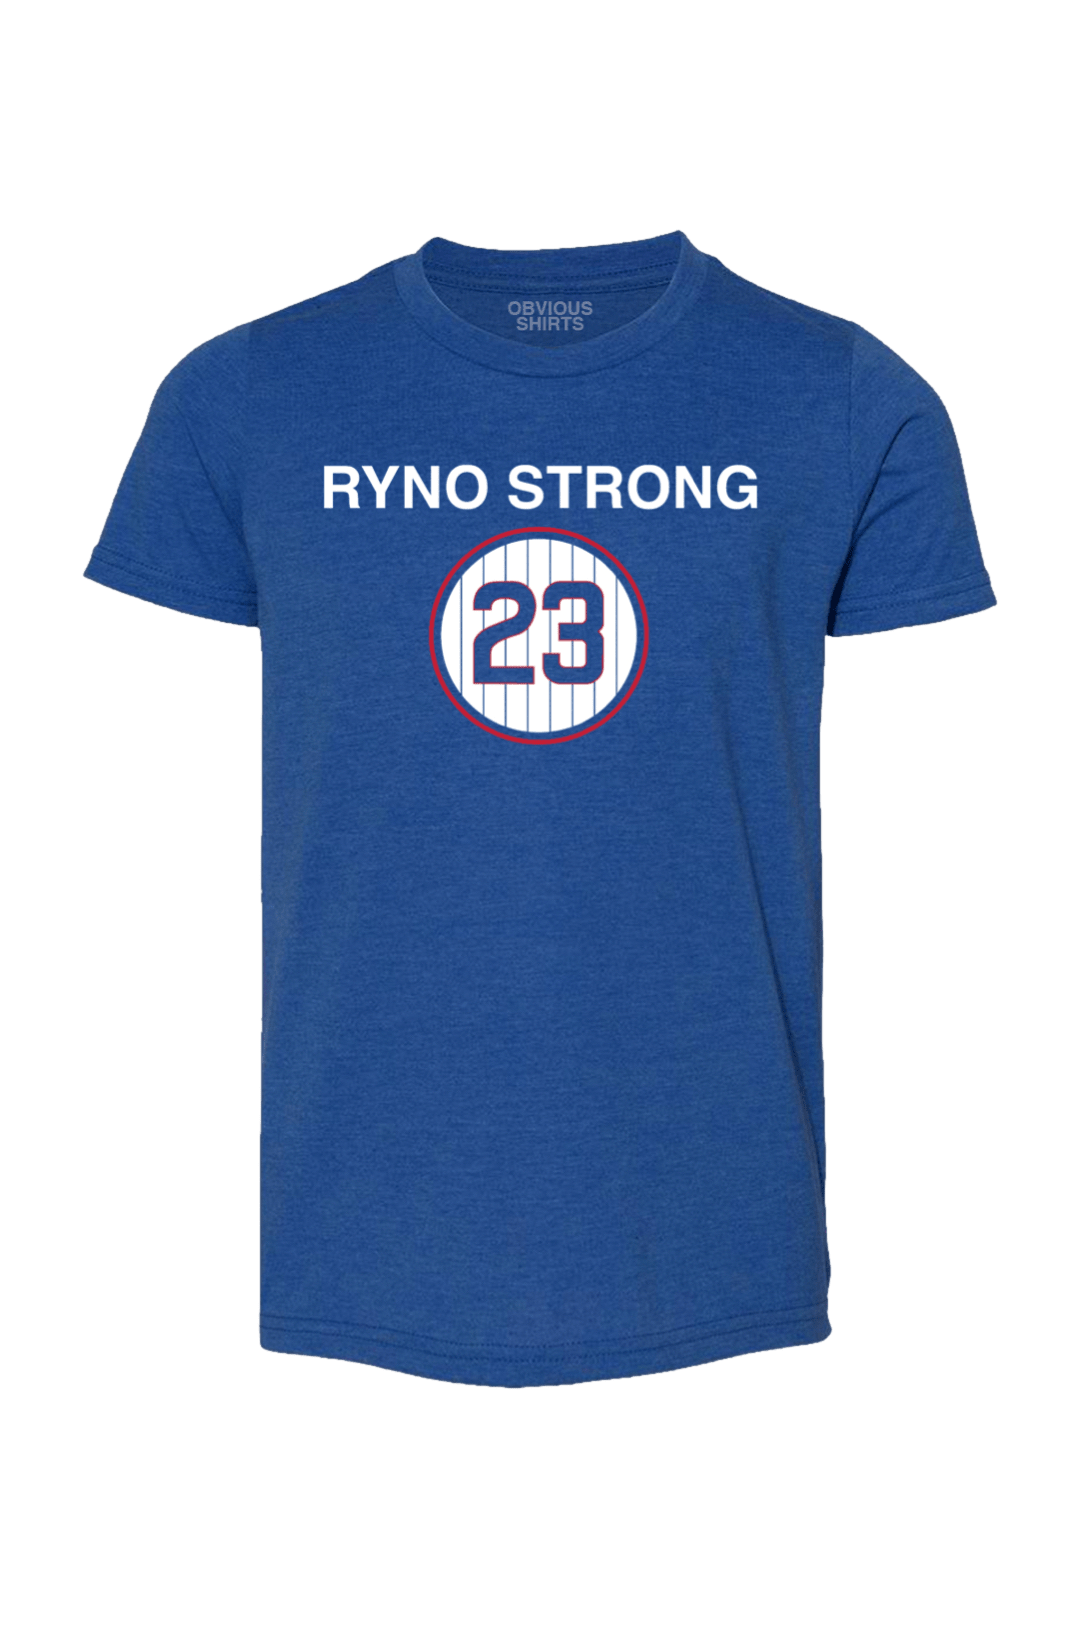 RYNO STRONG 23. (YOUTH) - OBVIOUS SHIRTS